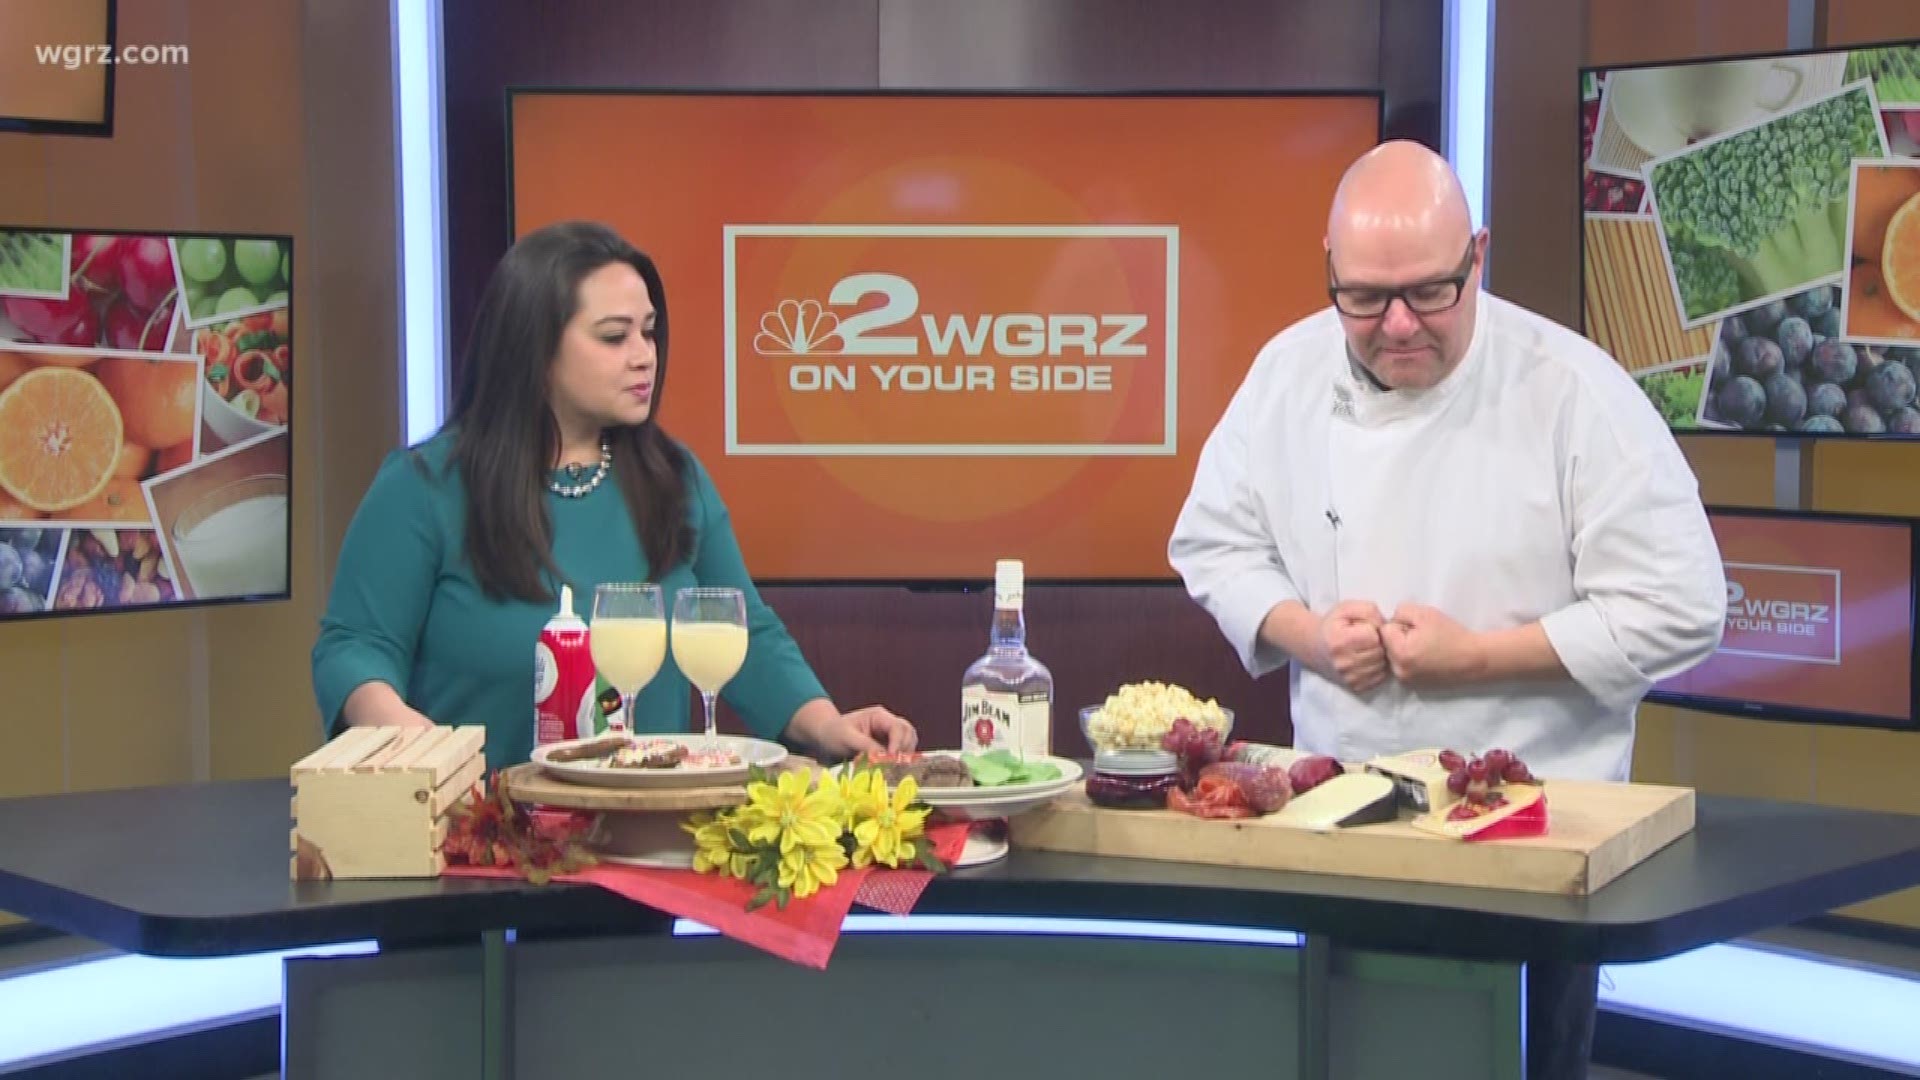 A fancy and festive Christmas dinner table doesn't have to take a lot of time or money. He stopped by Daybreak with some easy ideas to entertain.